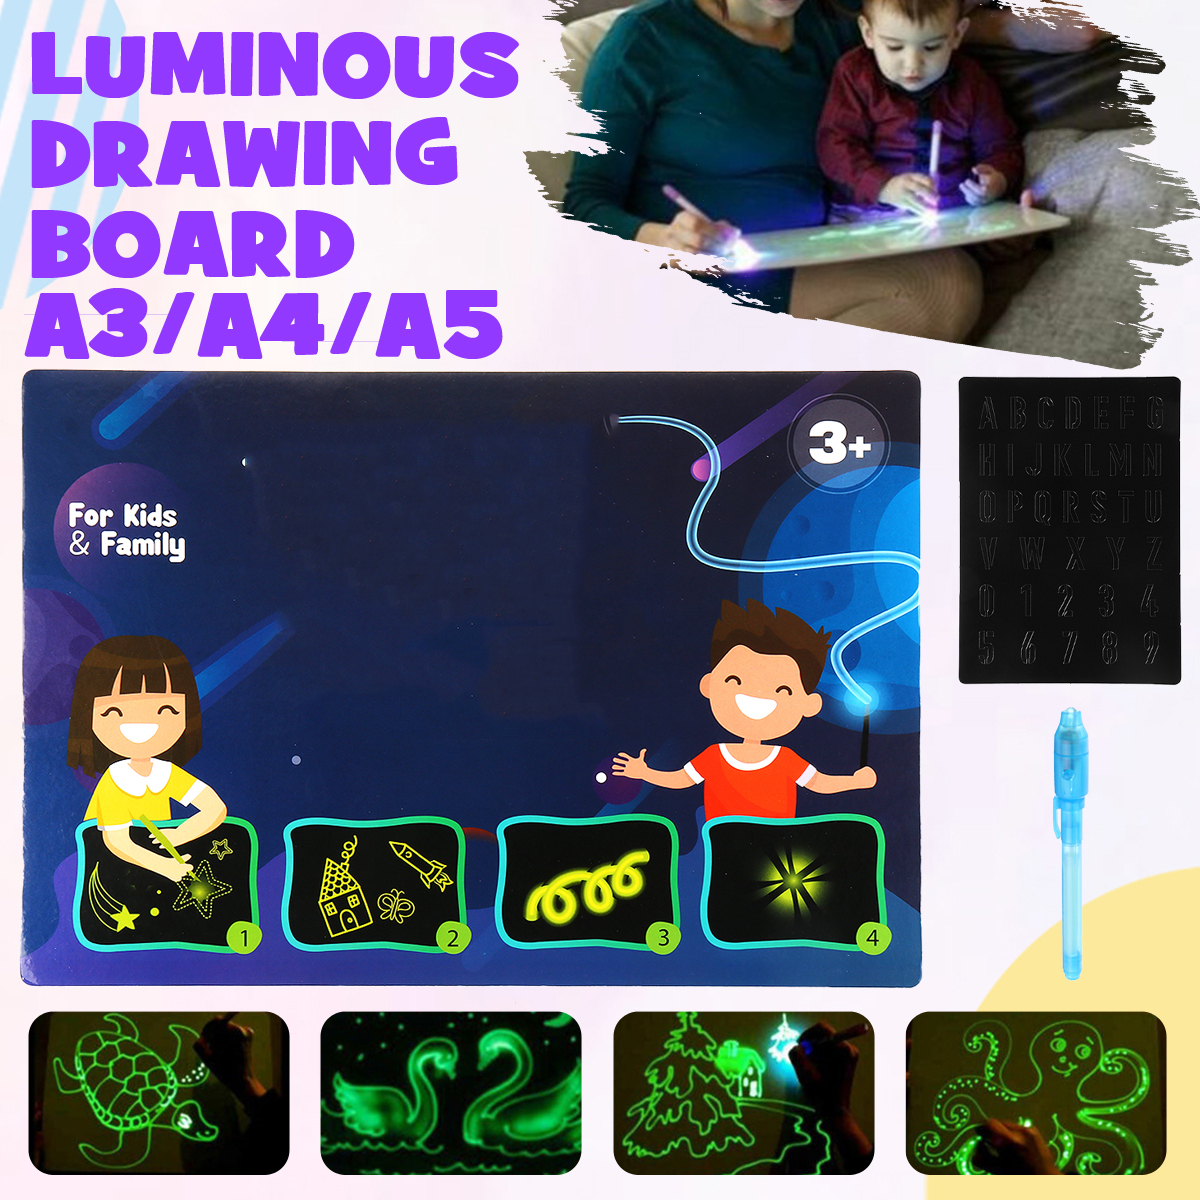 A3--A4--A5-Repainted-Luminous-Hand-Writing-Drawing-Board-with-Copy-Cardboard-1784623-1